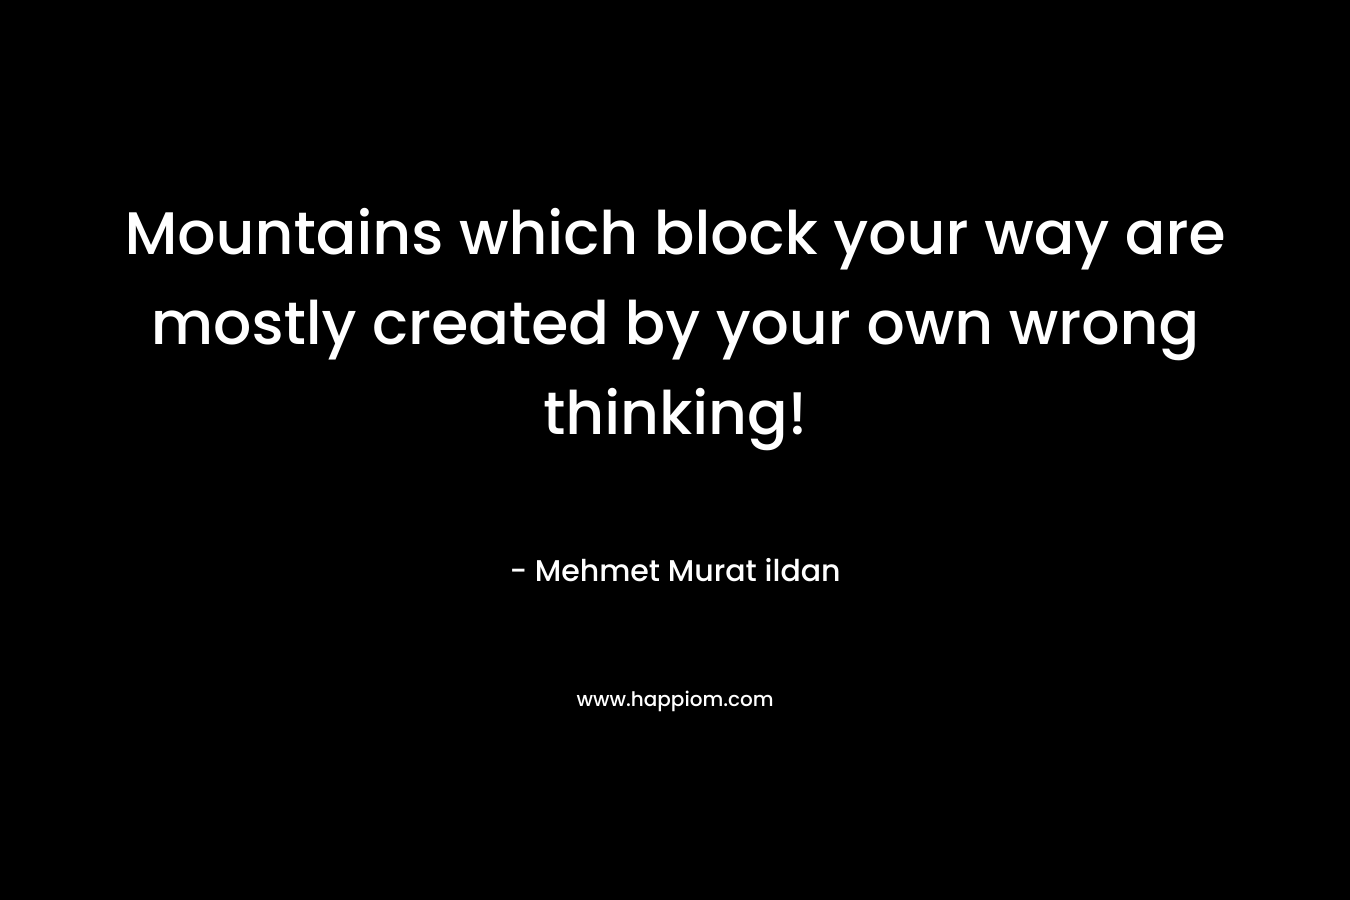 Mountains which block your way are mostly created by your own wrong thinking! – Mehmet Murat ildan